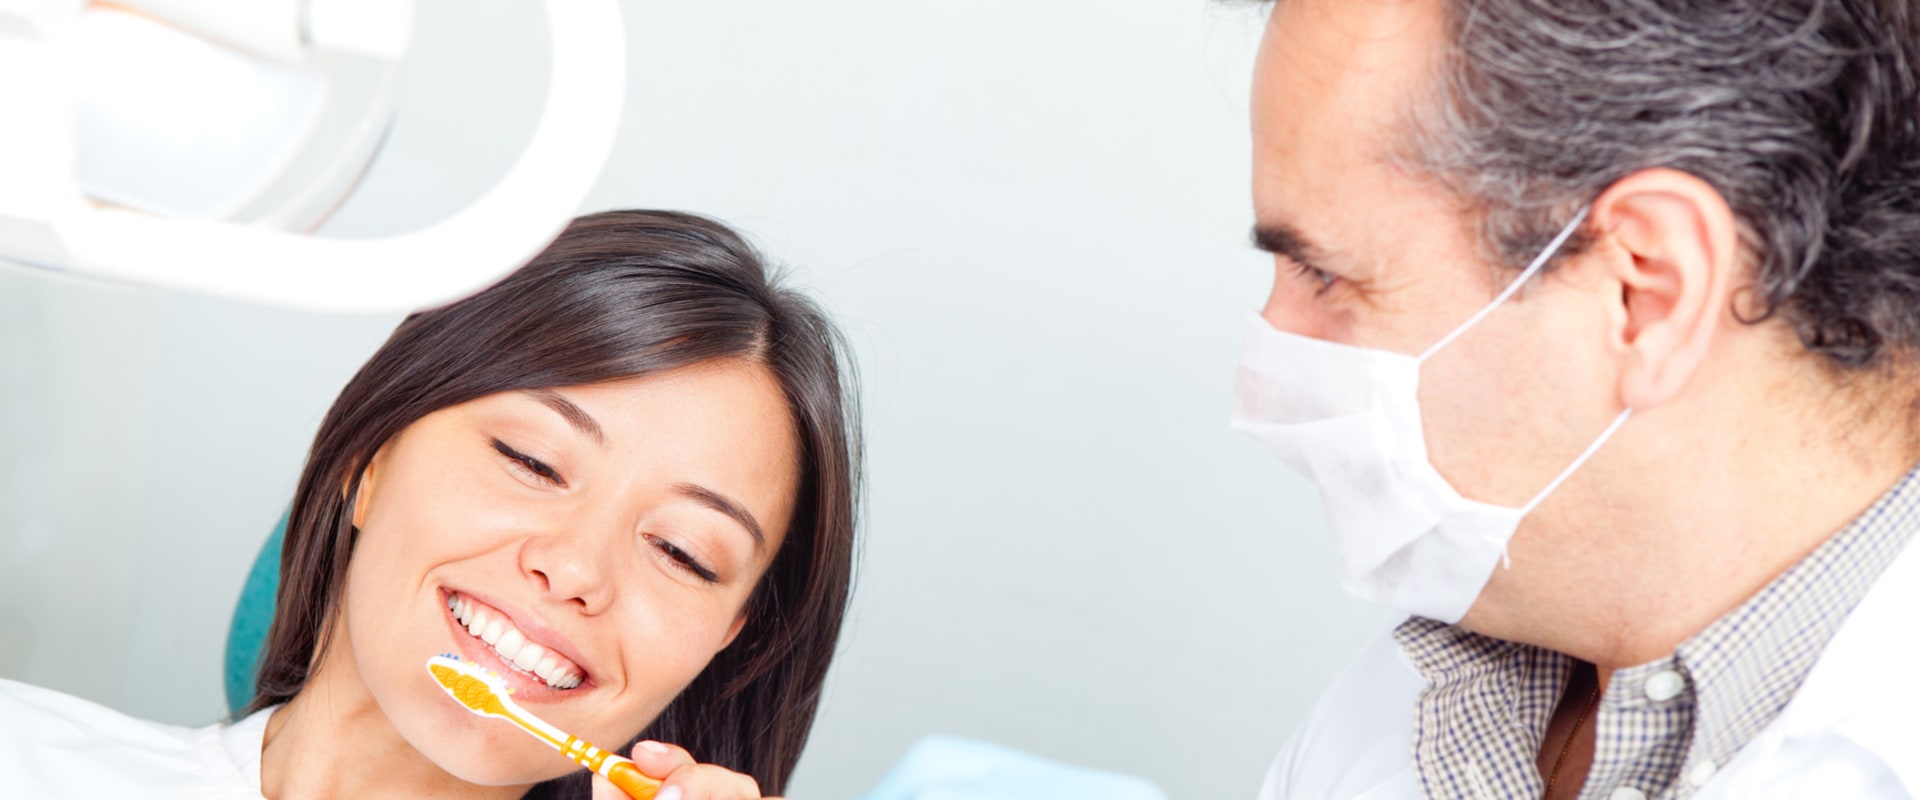 Where to Find the Best Endodontists Near Me?